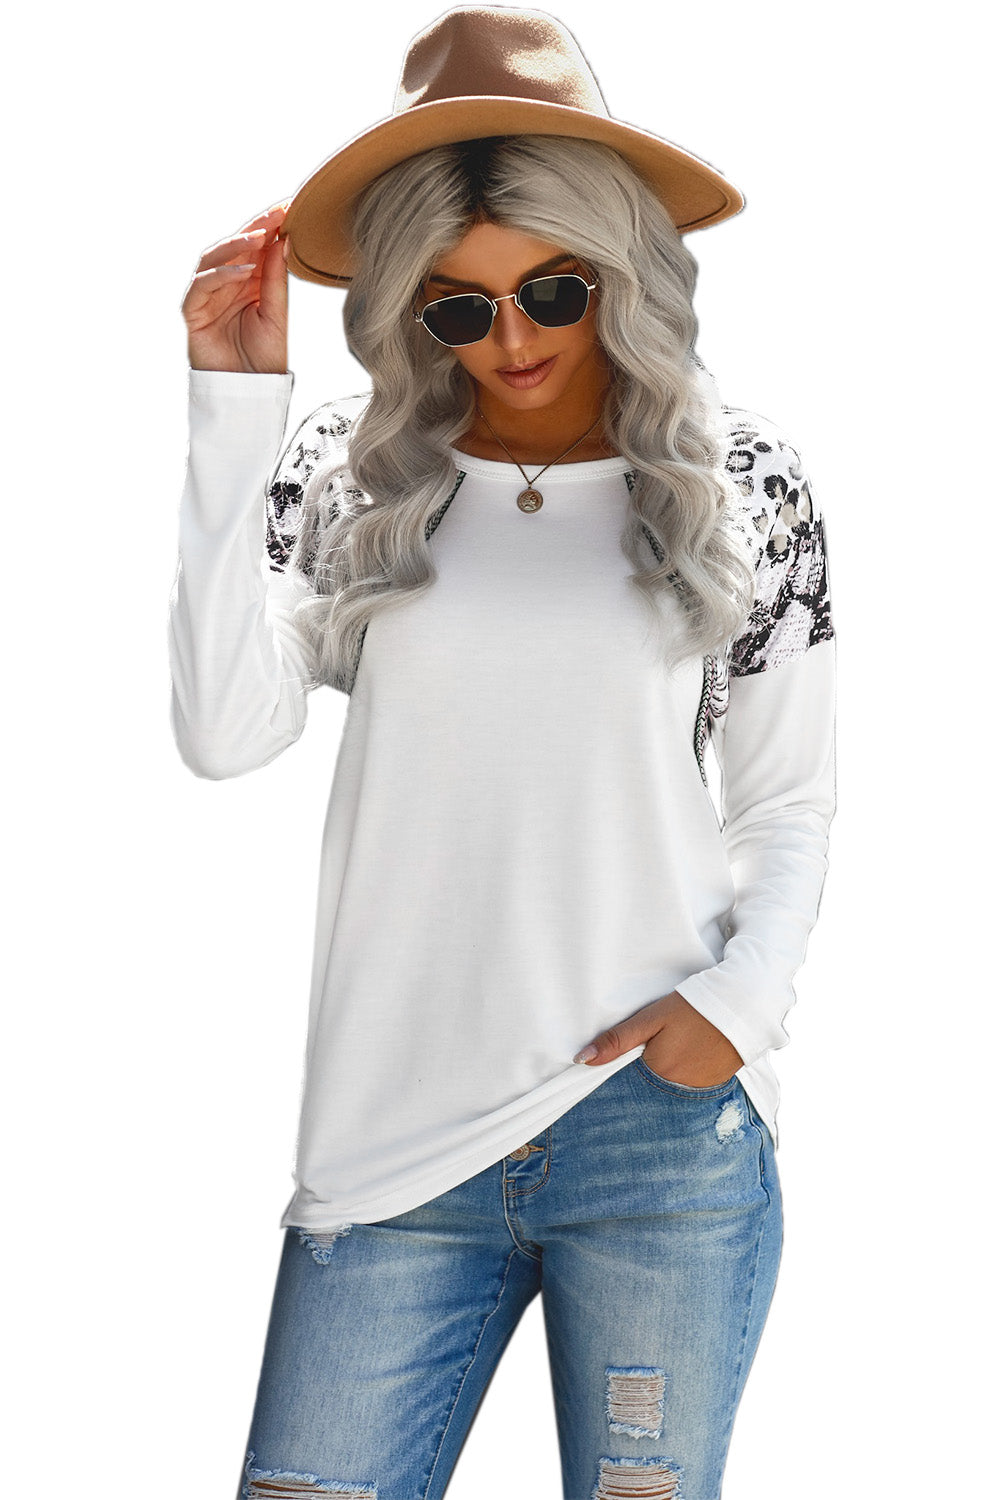 Casual White Long Sleeve Top With Leopard Snakeskin Print